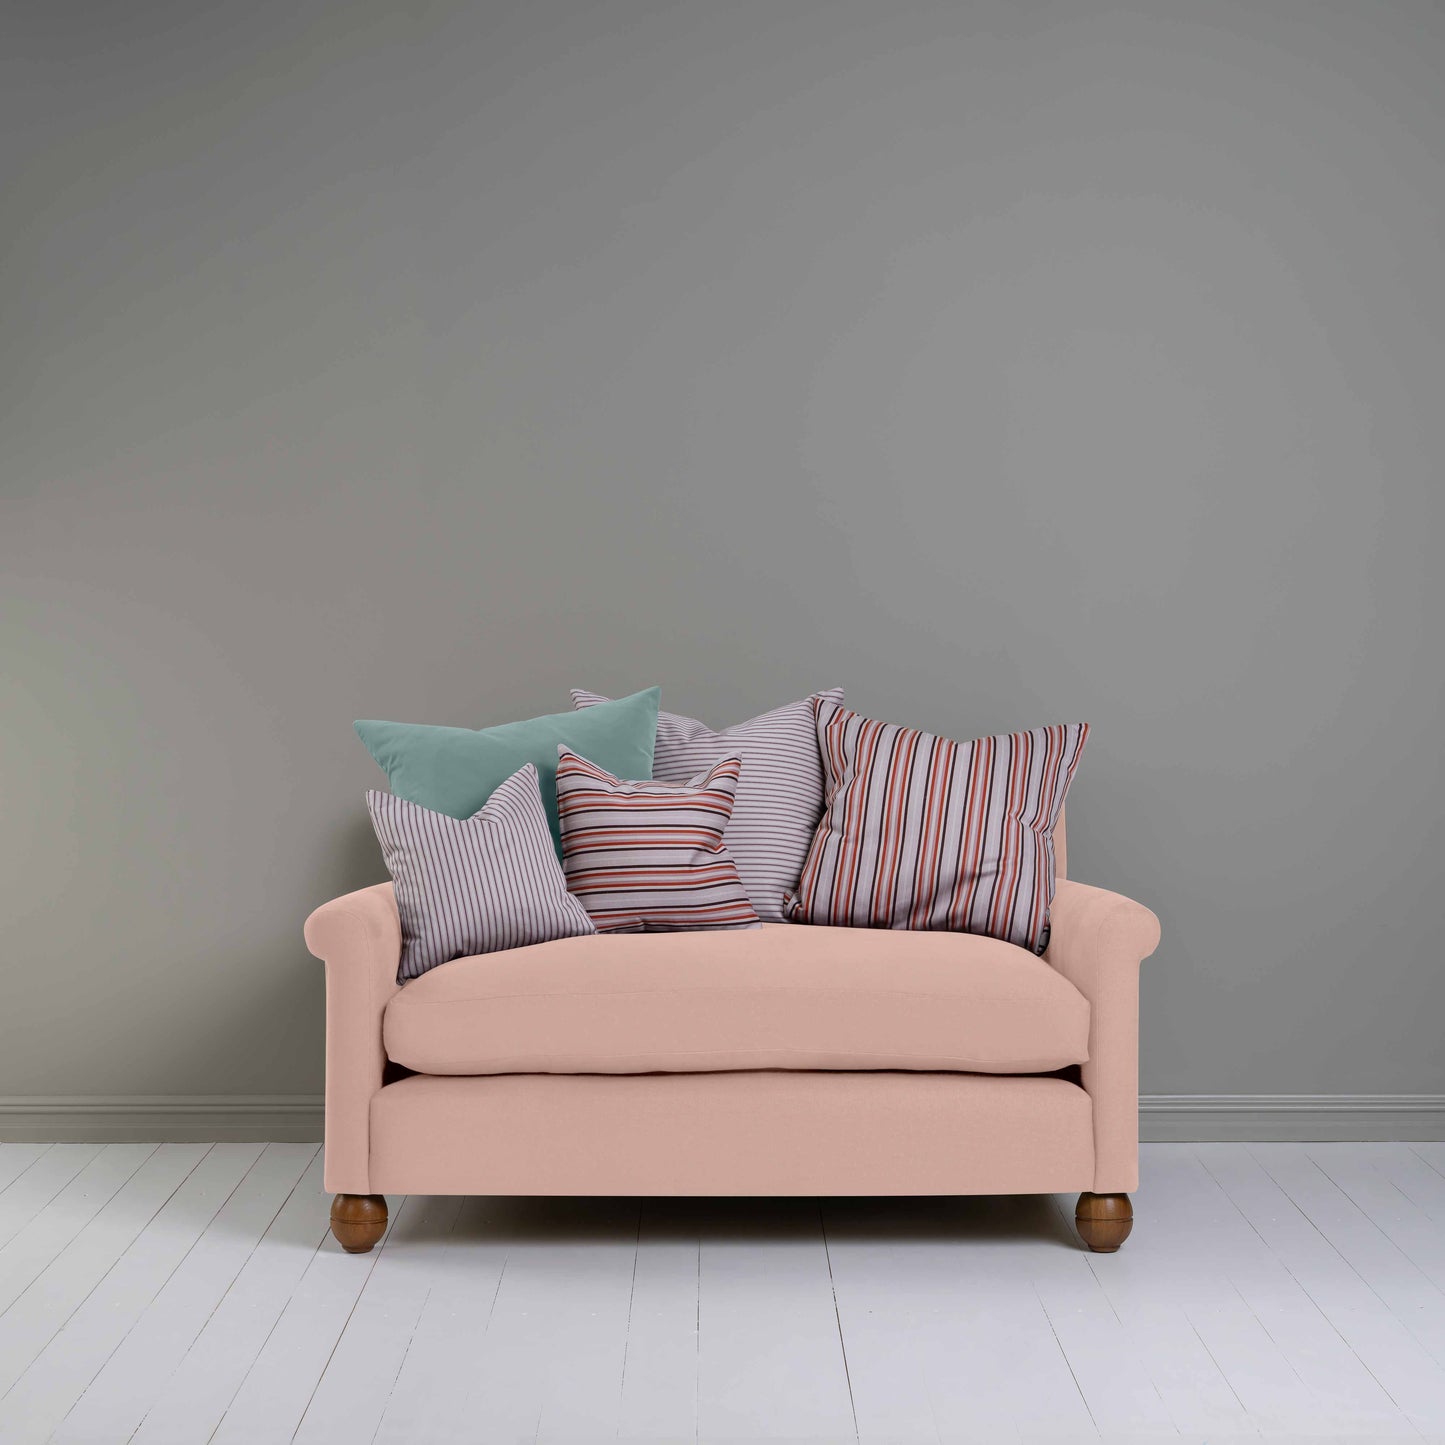 Idler 2 Seater Sofa in Laidback Linen Dusky Pink